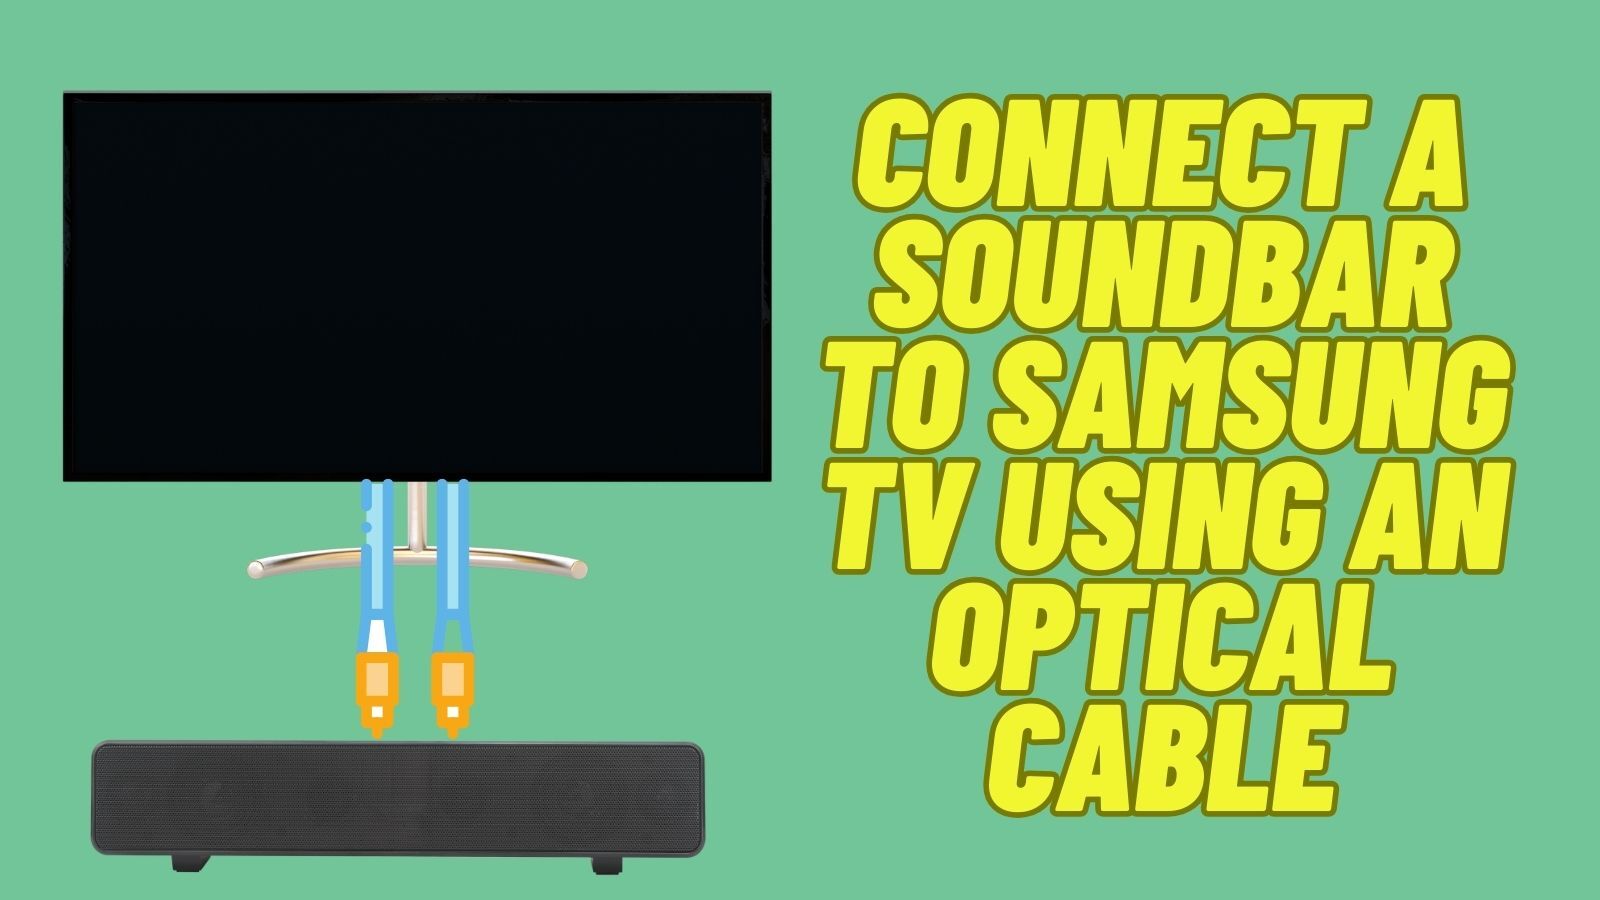 How to Connect A Soundbar to A Samsung TV Using an Optical Cable?